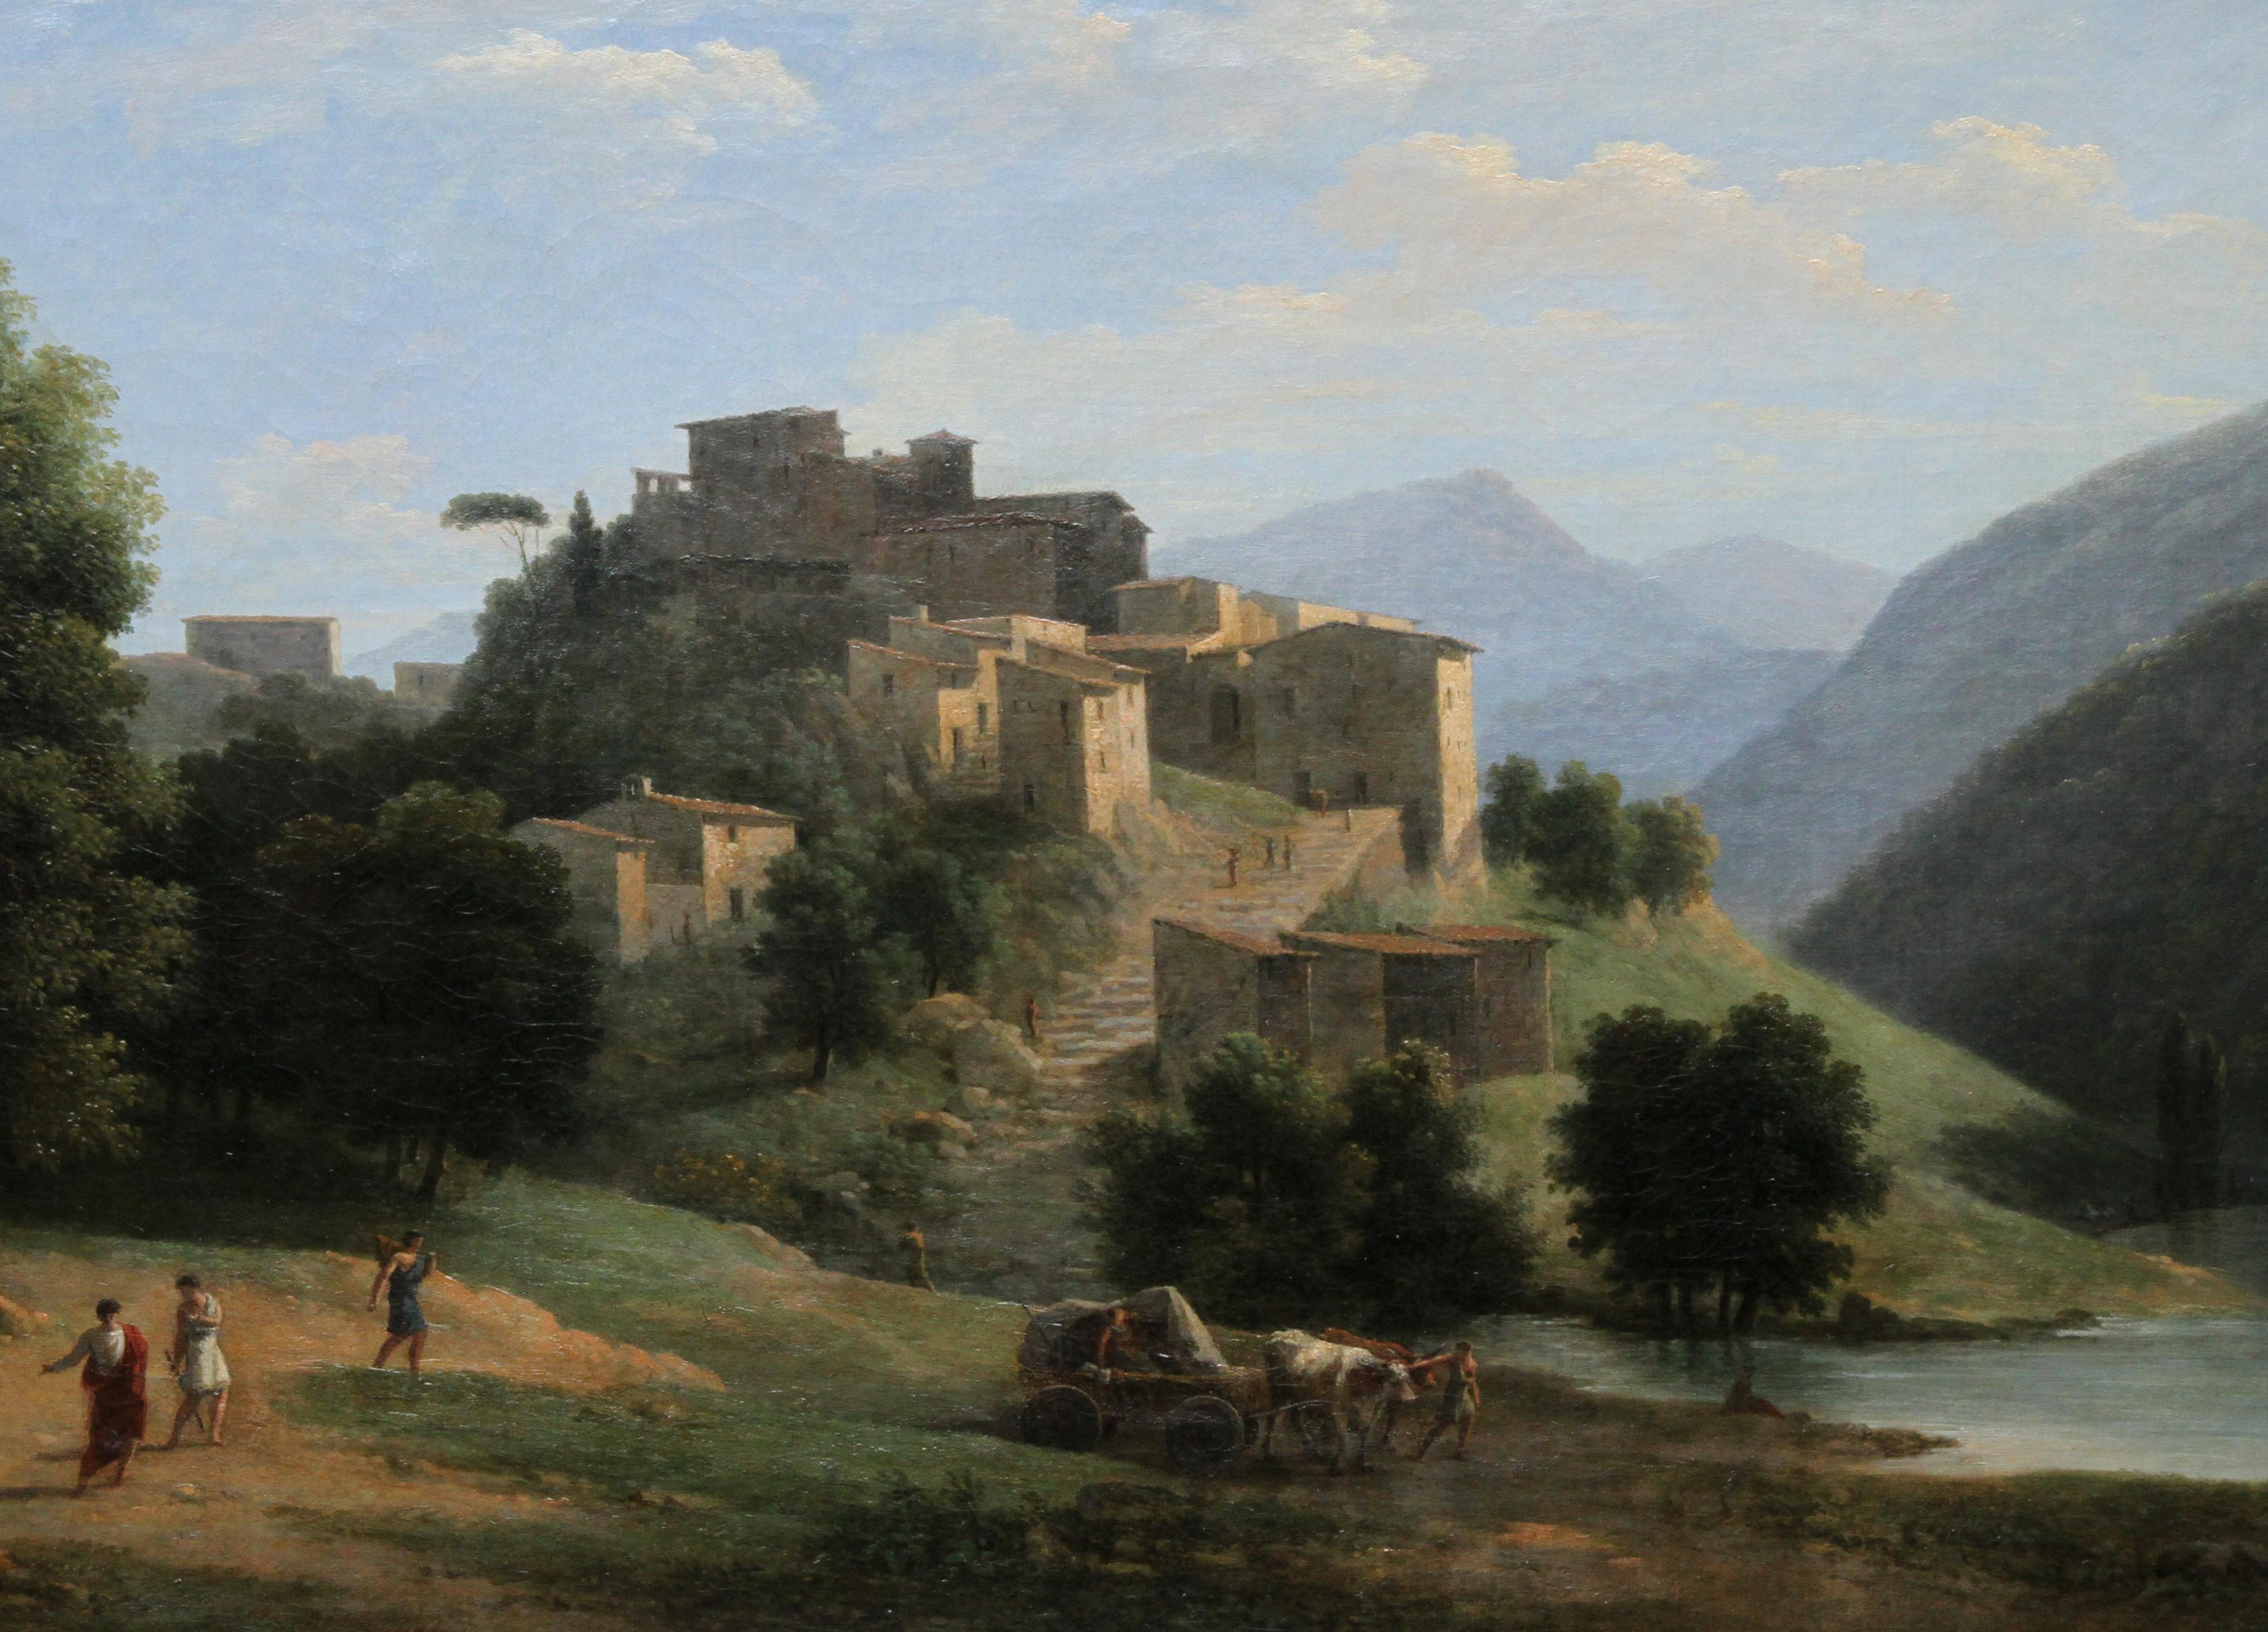 This stunning Neo Classical French 19th century landscape oil painting is by acclaimed French artist Jean Victor Bertin. He was also an early proponent of sketching out doors and direct observation in order to replicate nature later in studio